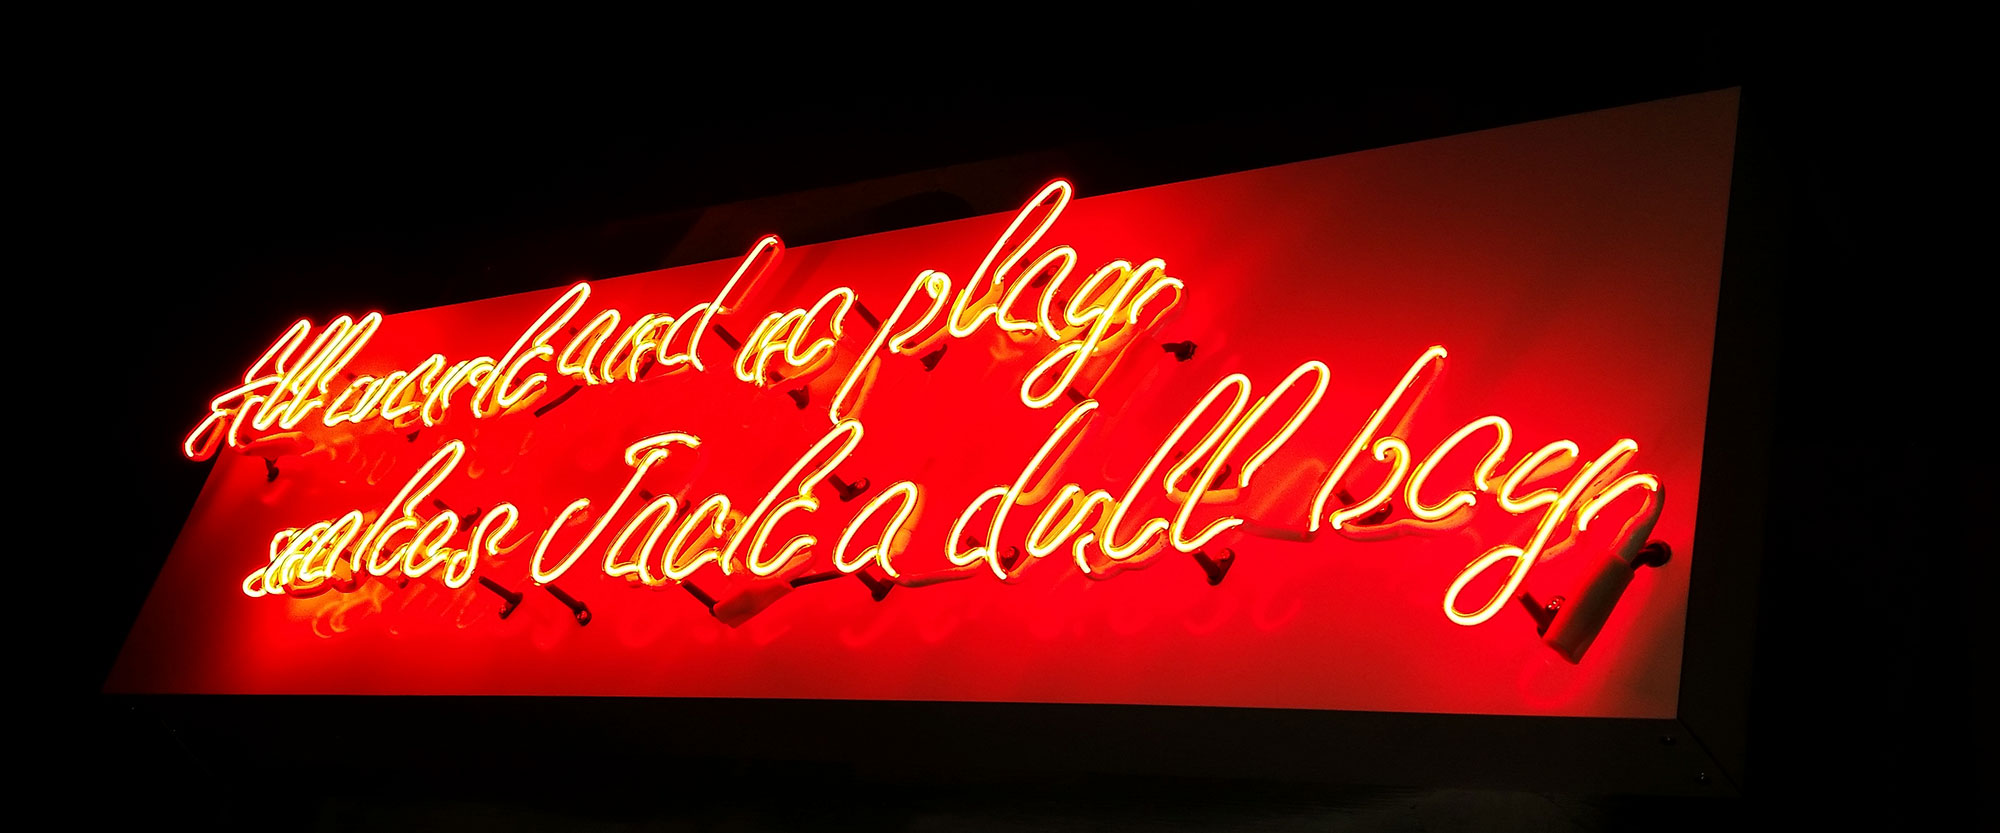 neon signs are durable, long-lasting and have a warmer light than other types of signs.